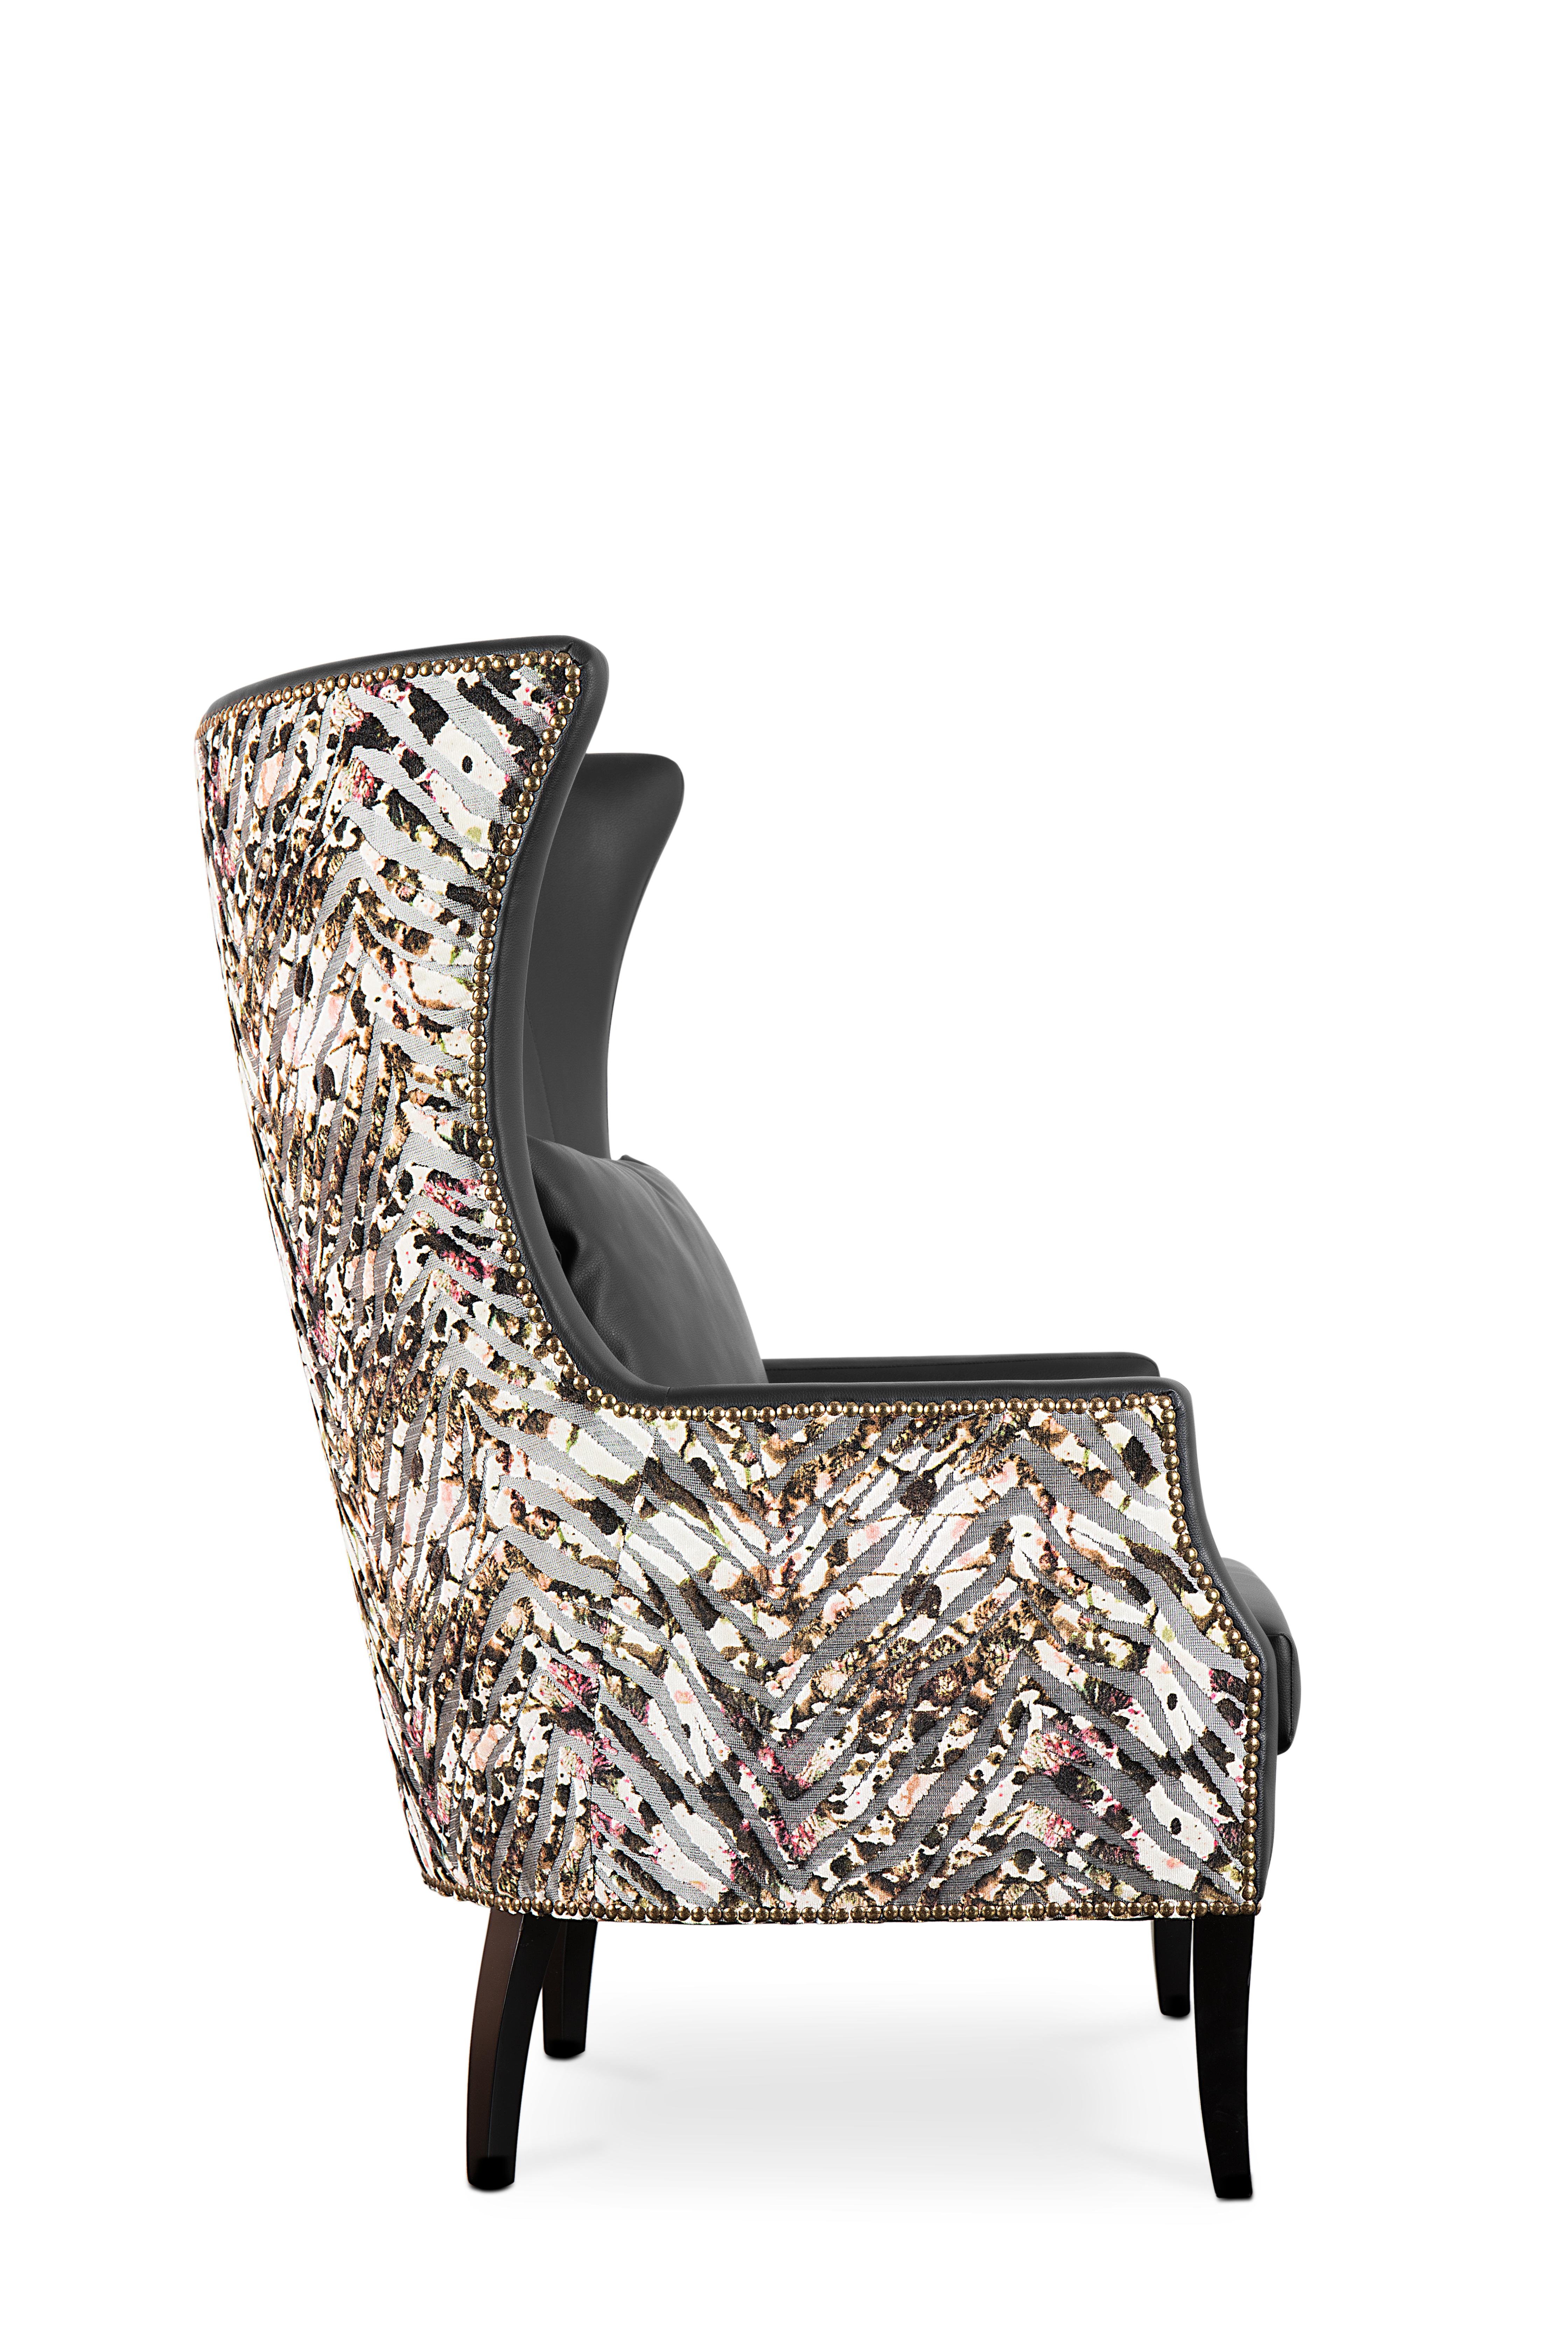 Dukono Armchair in Faux Leather With Aged Gold Nails For Sale 4